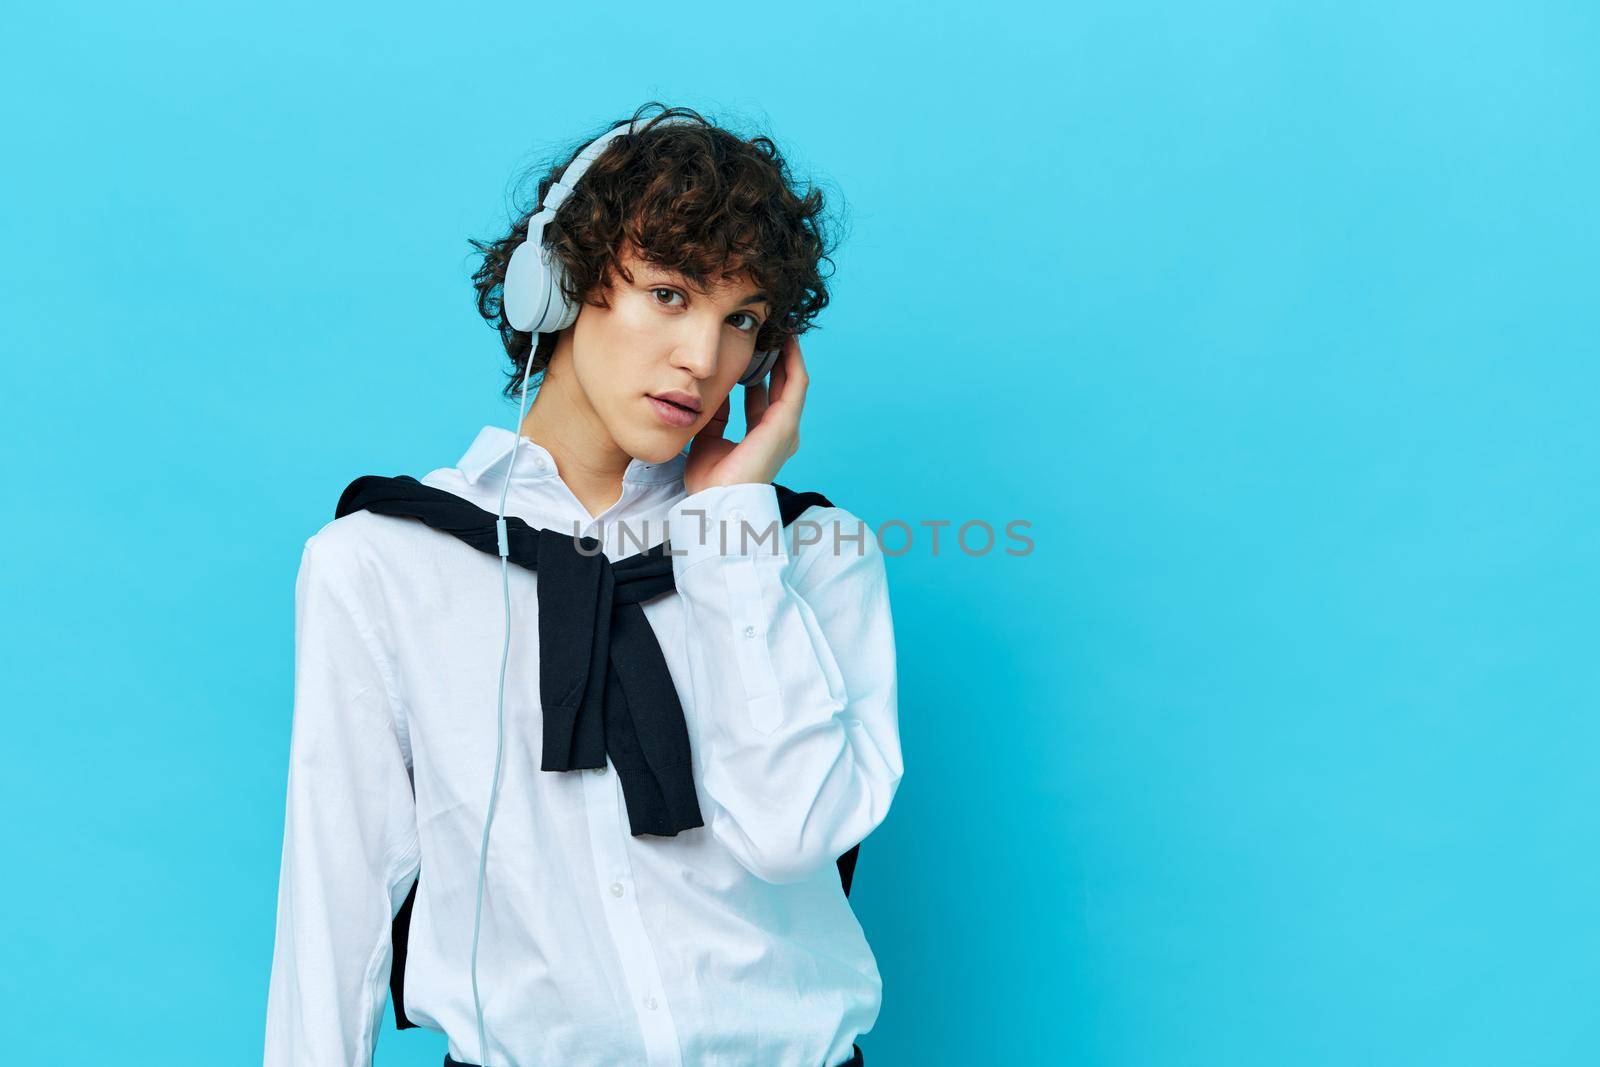 curly guy technology headphones in a white shirt with sweater blue background by SHOTPRIME